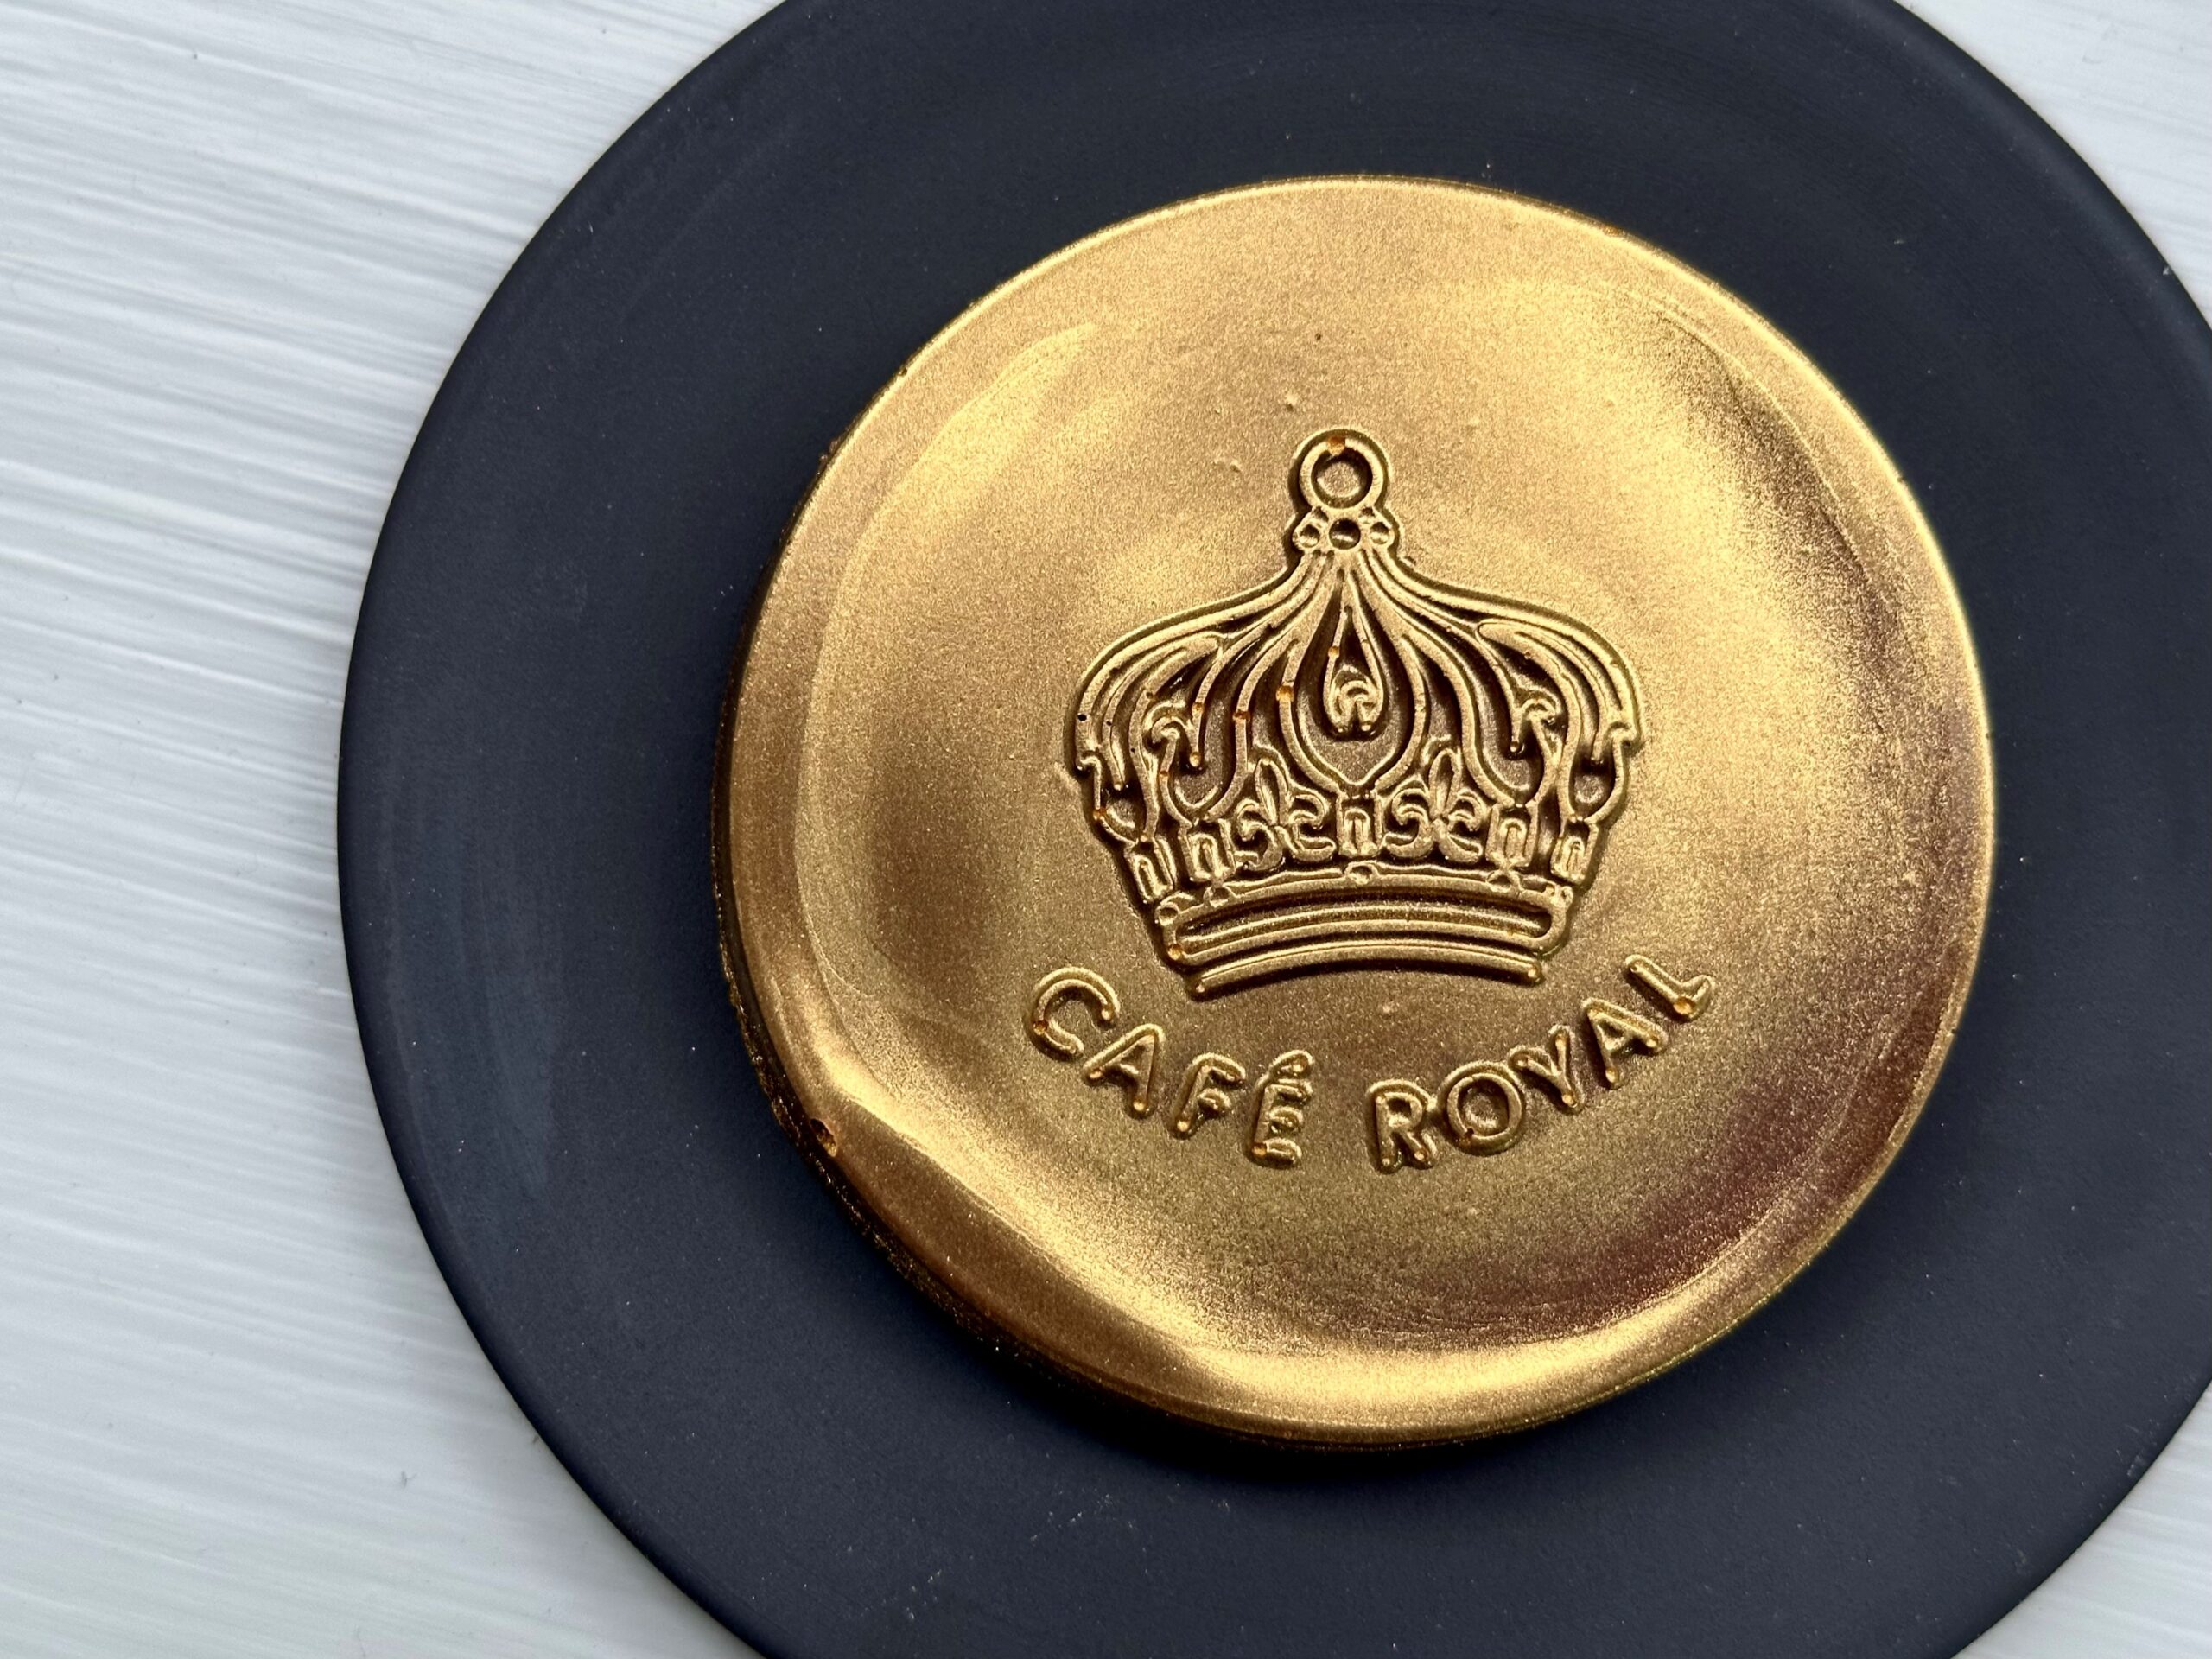 Hotel Cafe Royal Chocolate Coin